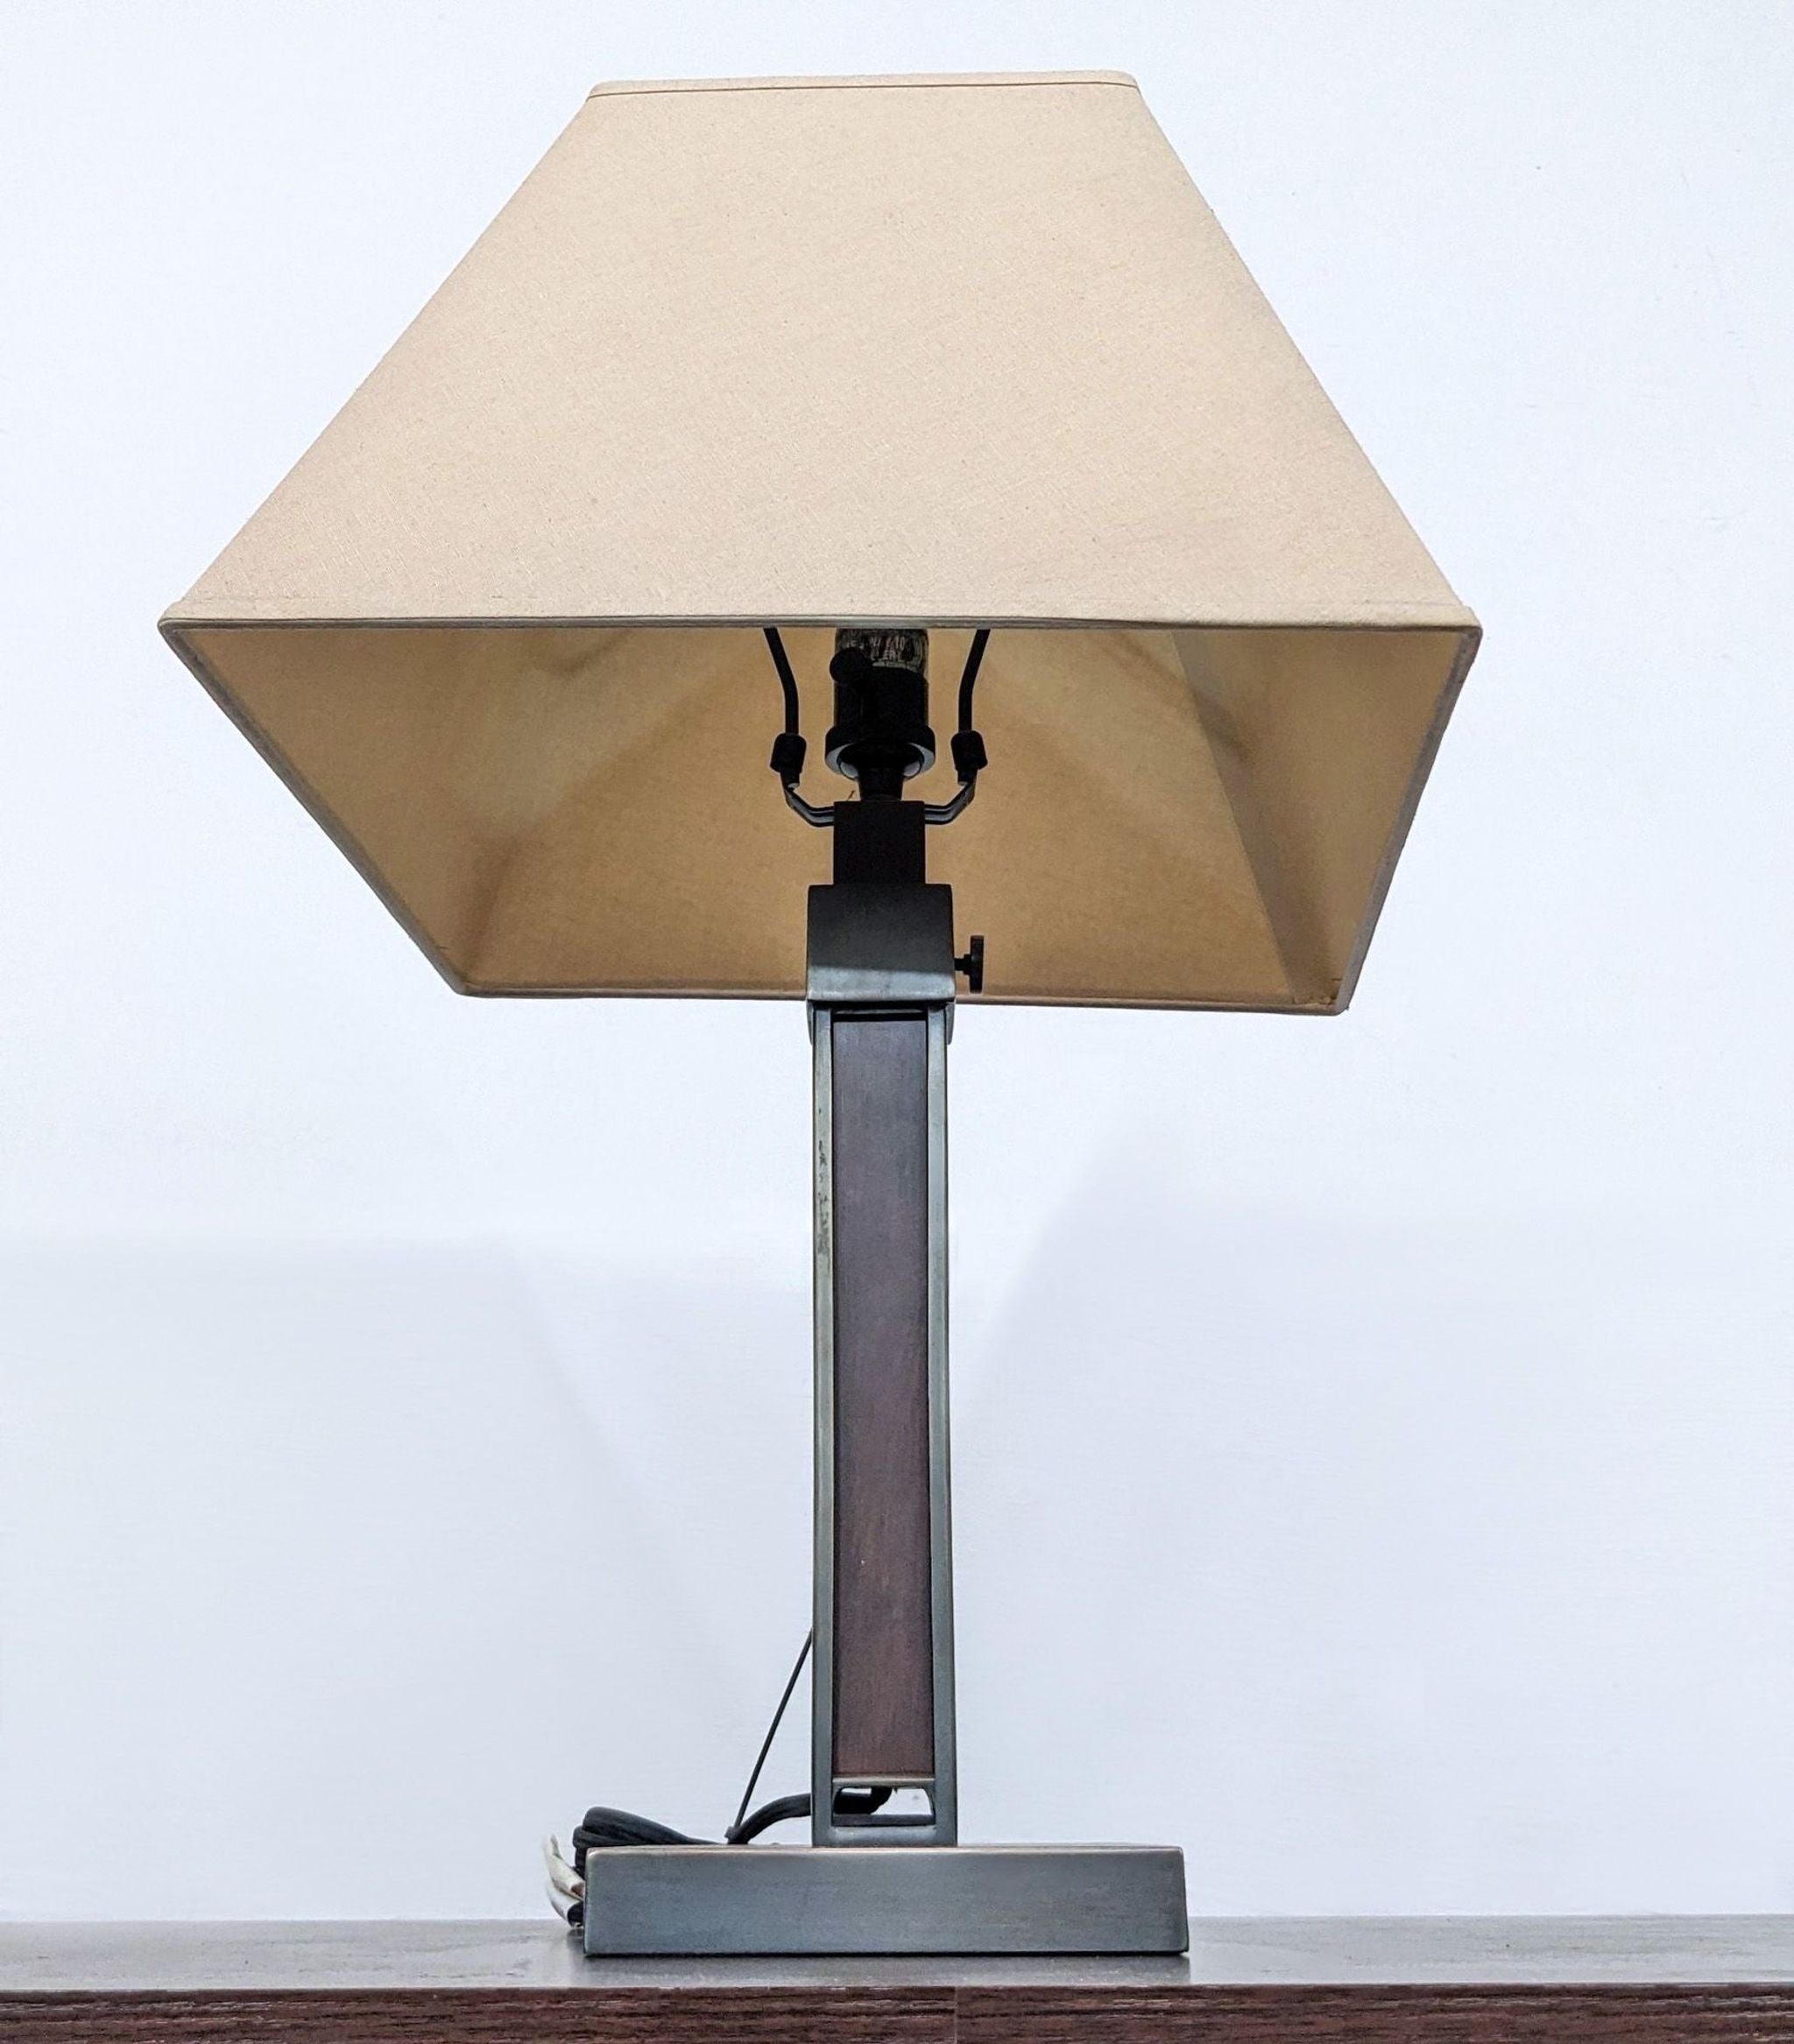 Close-up of Reperch table lamp showing beige lampshade, metallic neck, and base with visible cord and switch.